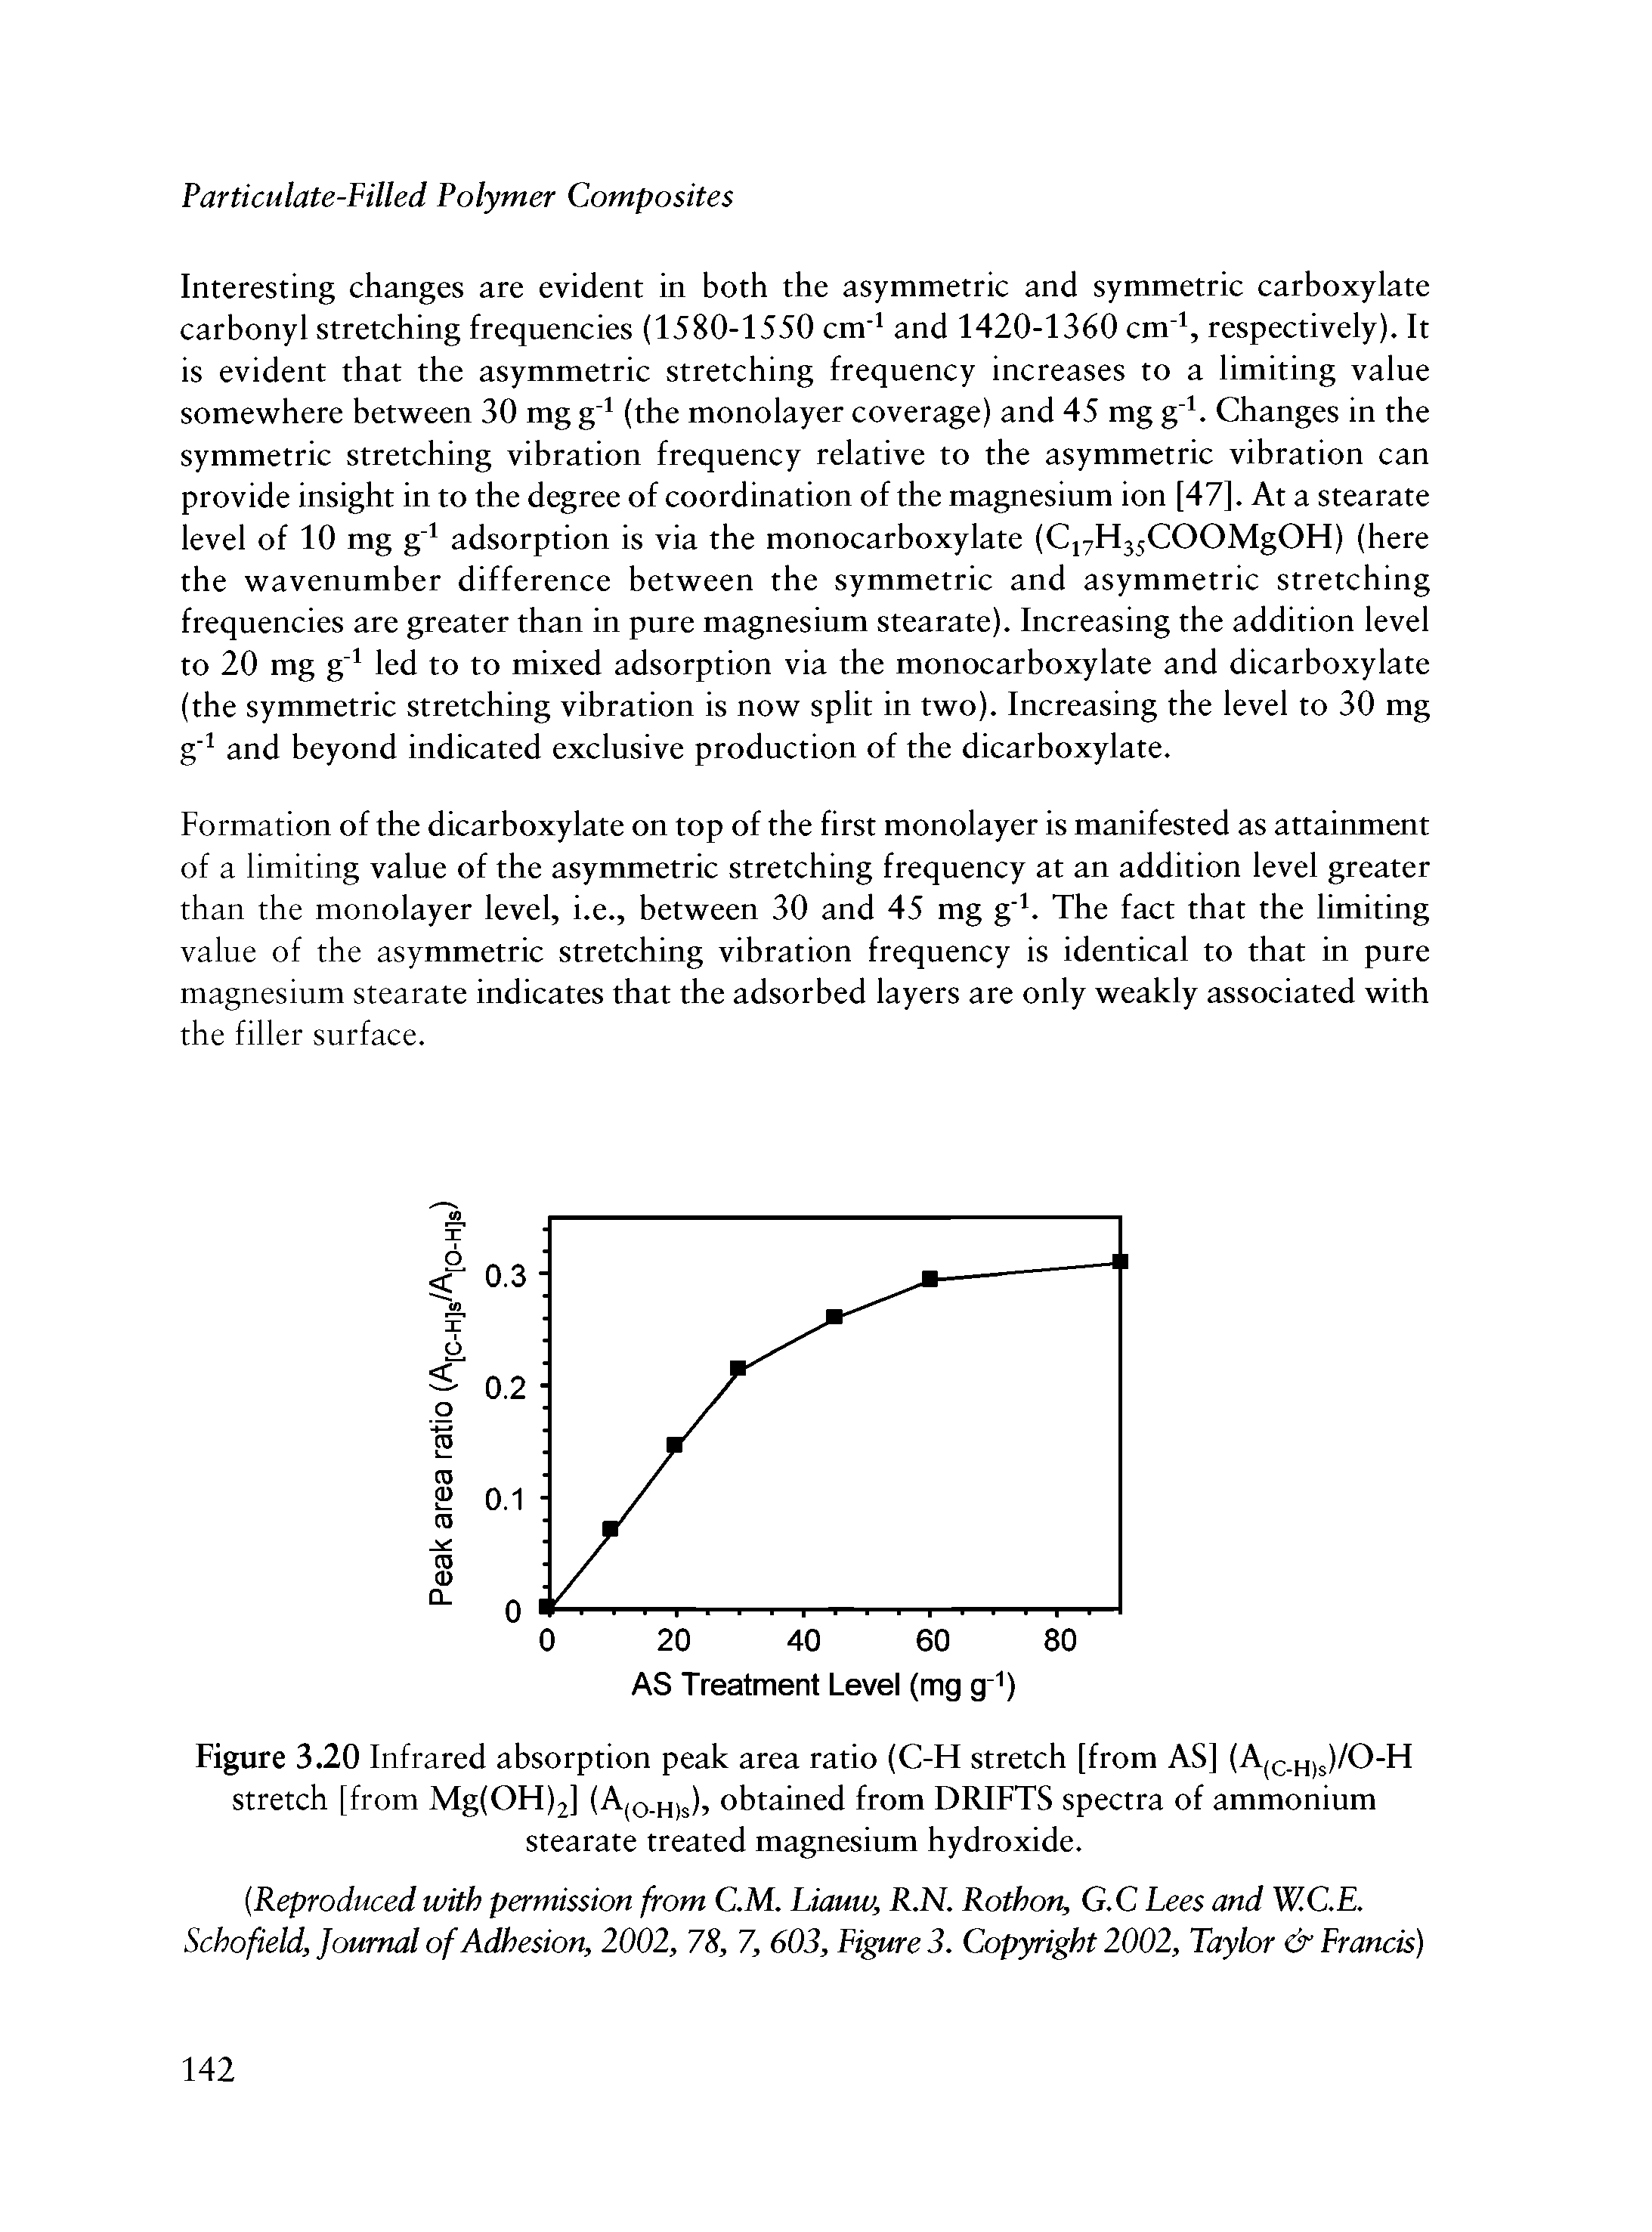 Figure 3.20 Infrared absorption peak area ratio (C-H stretch [from AS] (A(c h)s)/C) H stretch [from Mg(OH)2] ( o-h)s) obtained from DRIFTS spectra of ammonium stearate treated magnesium hydroxide.